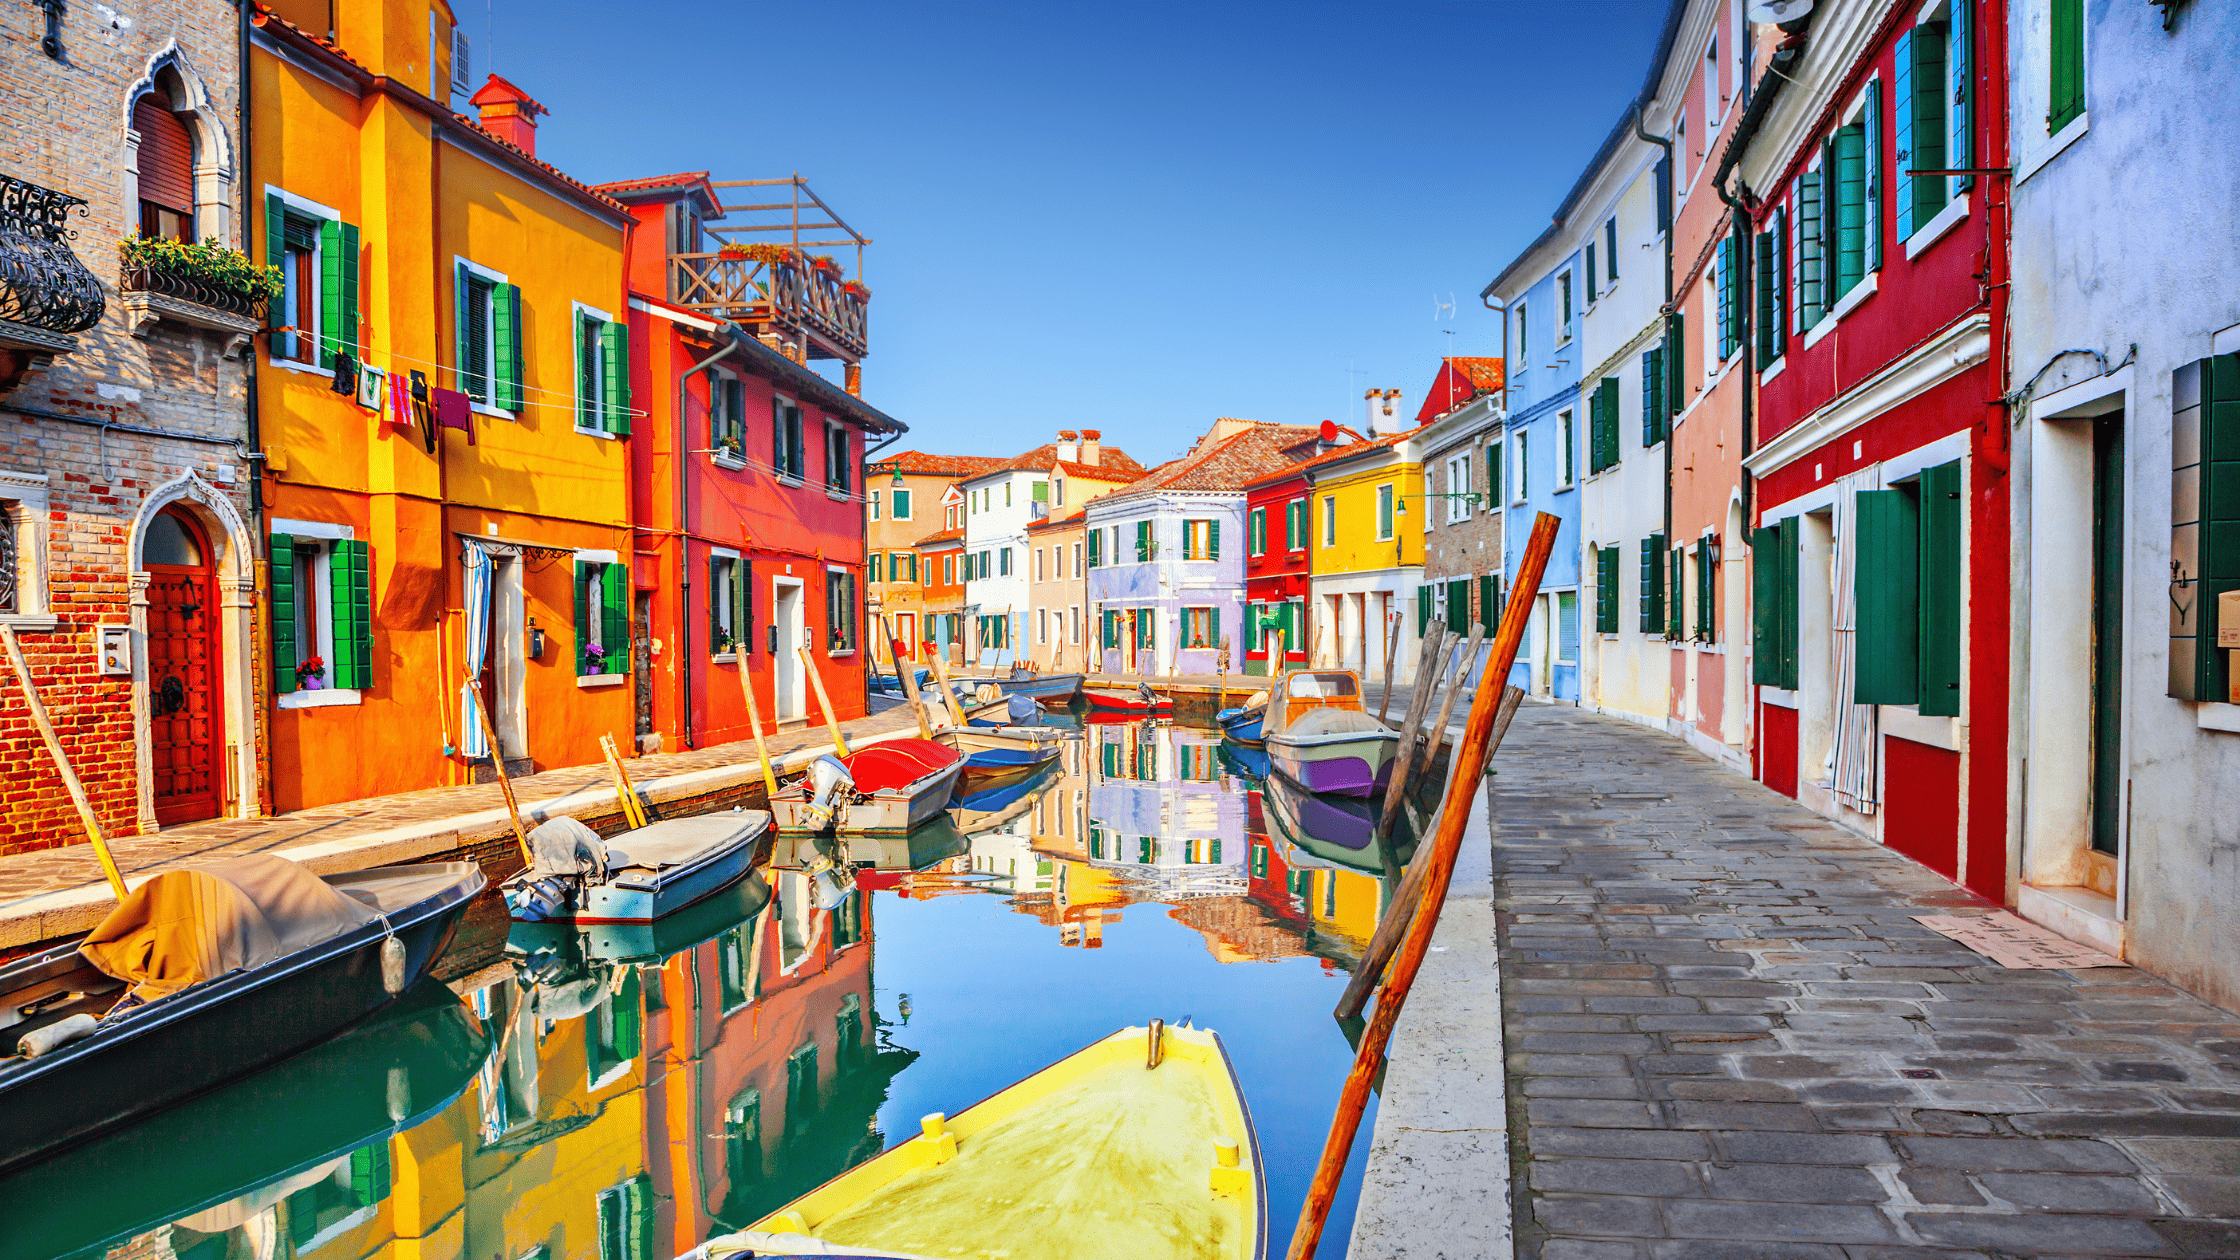 The most colourful places in the world